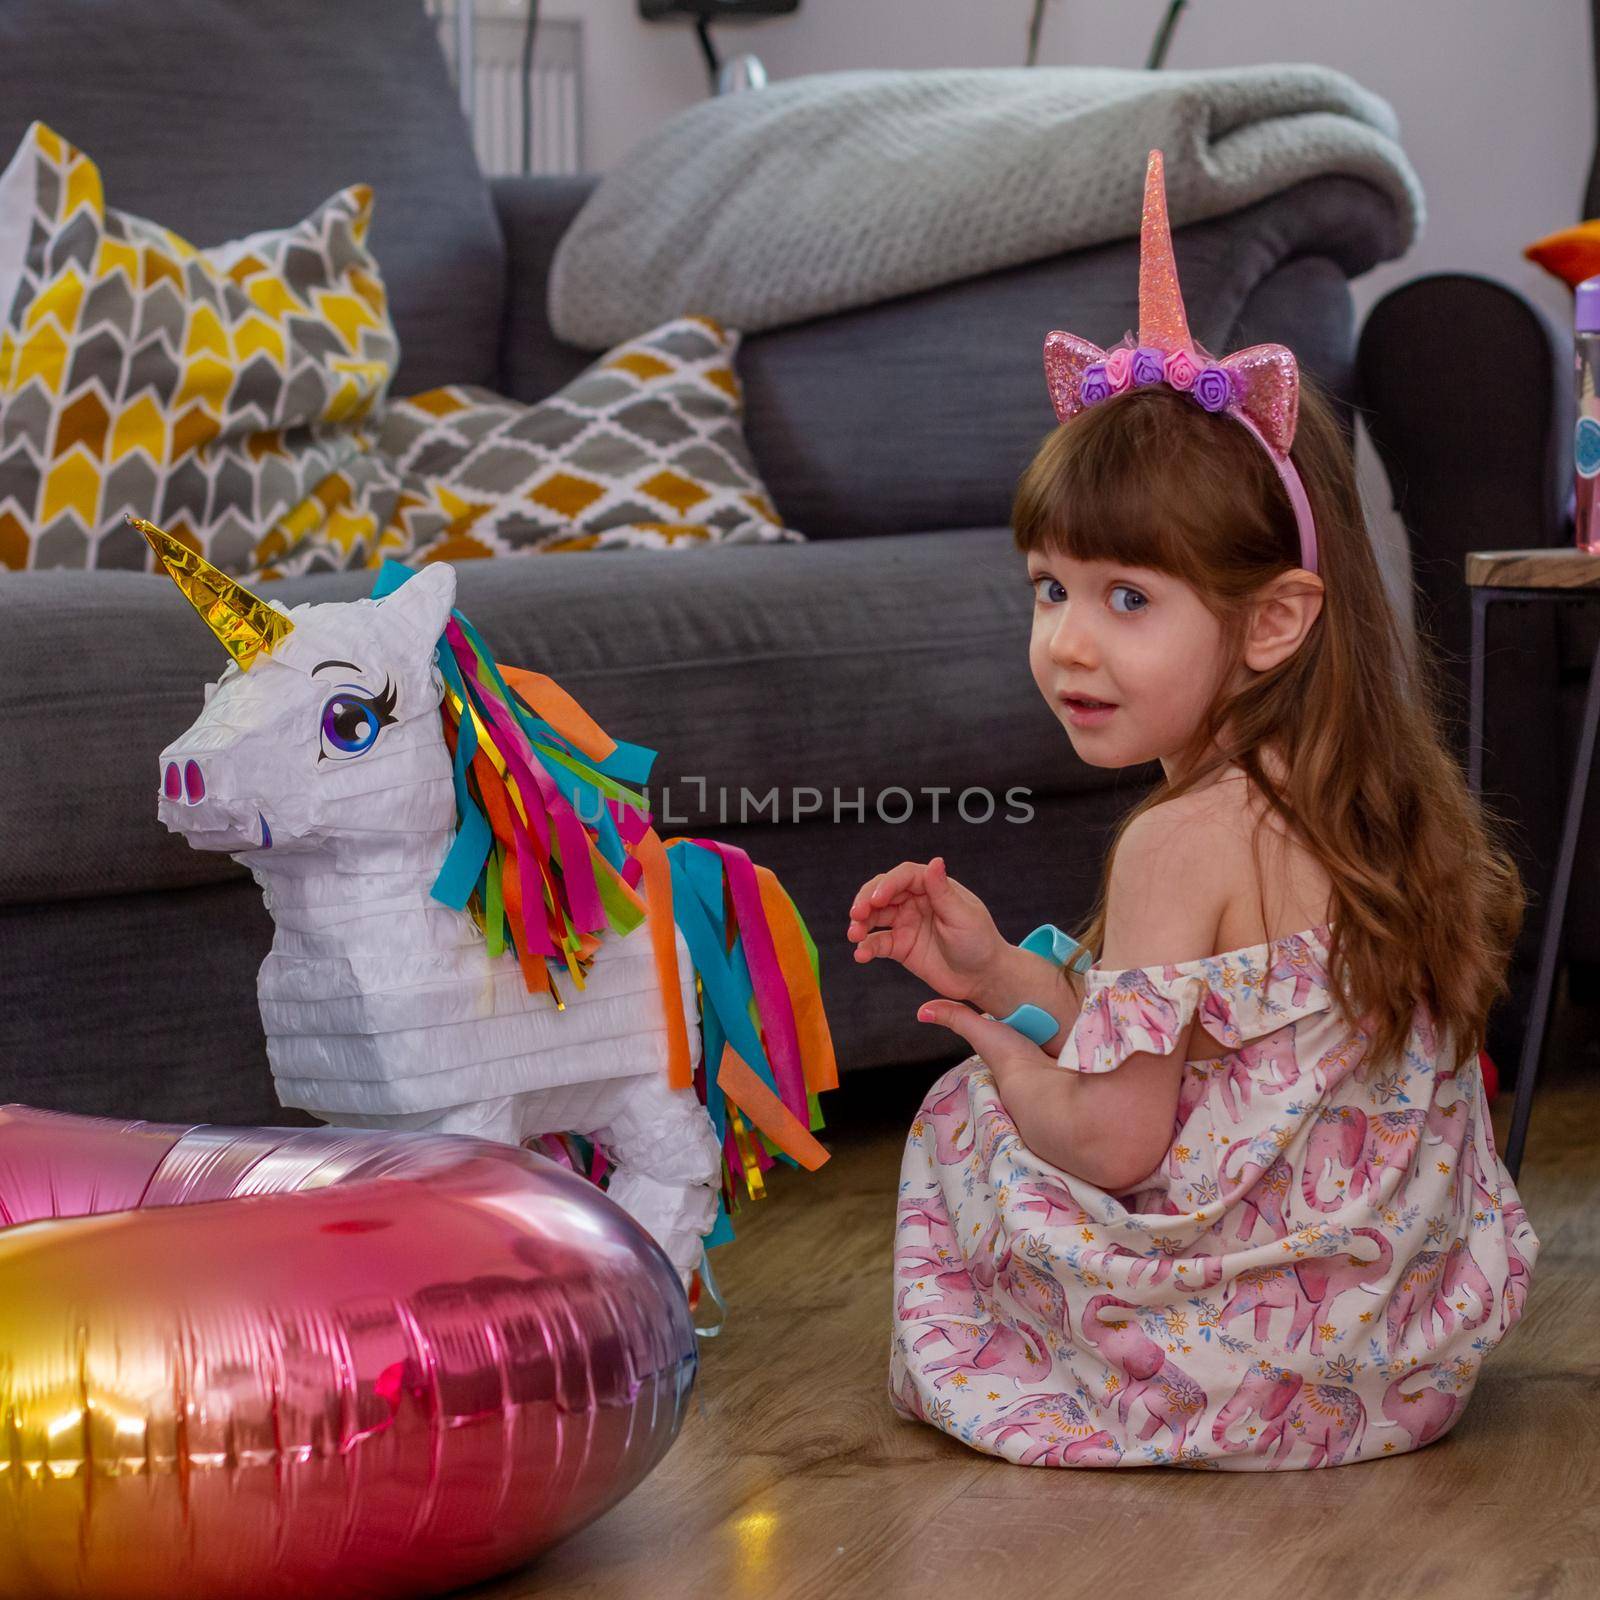 A Cute Baby Girl Sitting On The Floor With a Balloon And An Unicorn Pinata